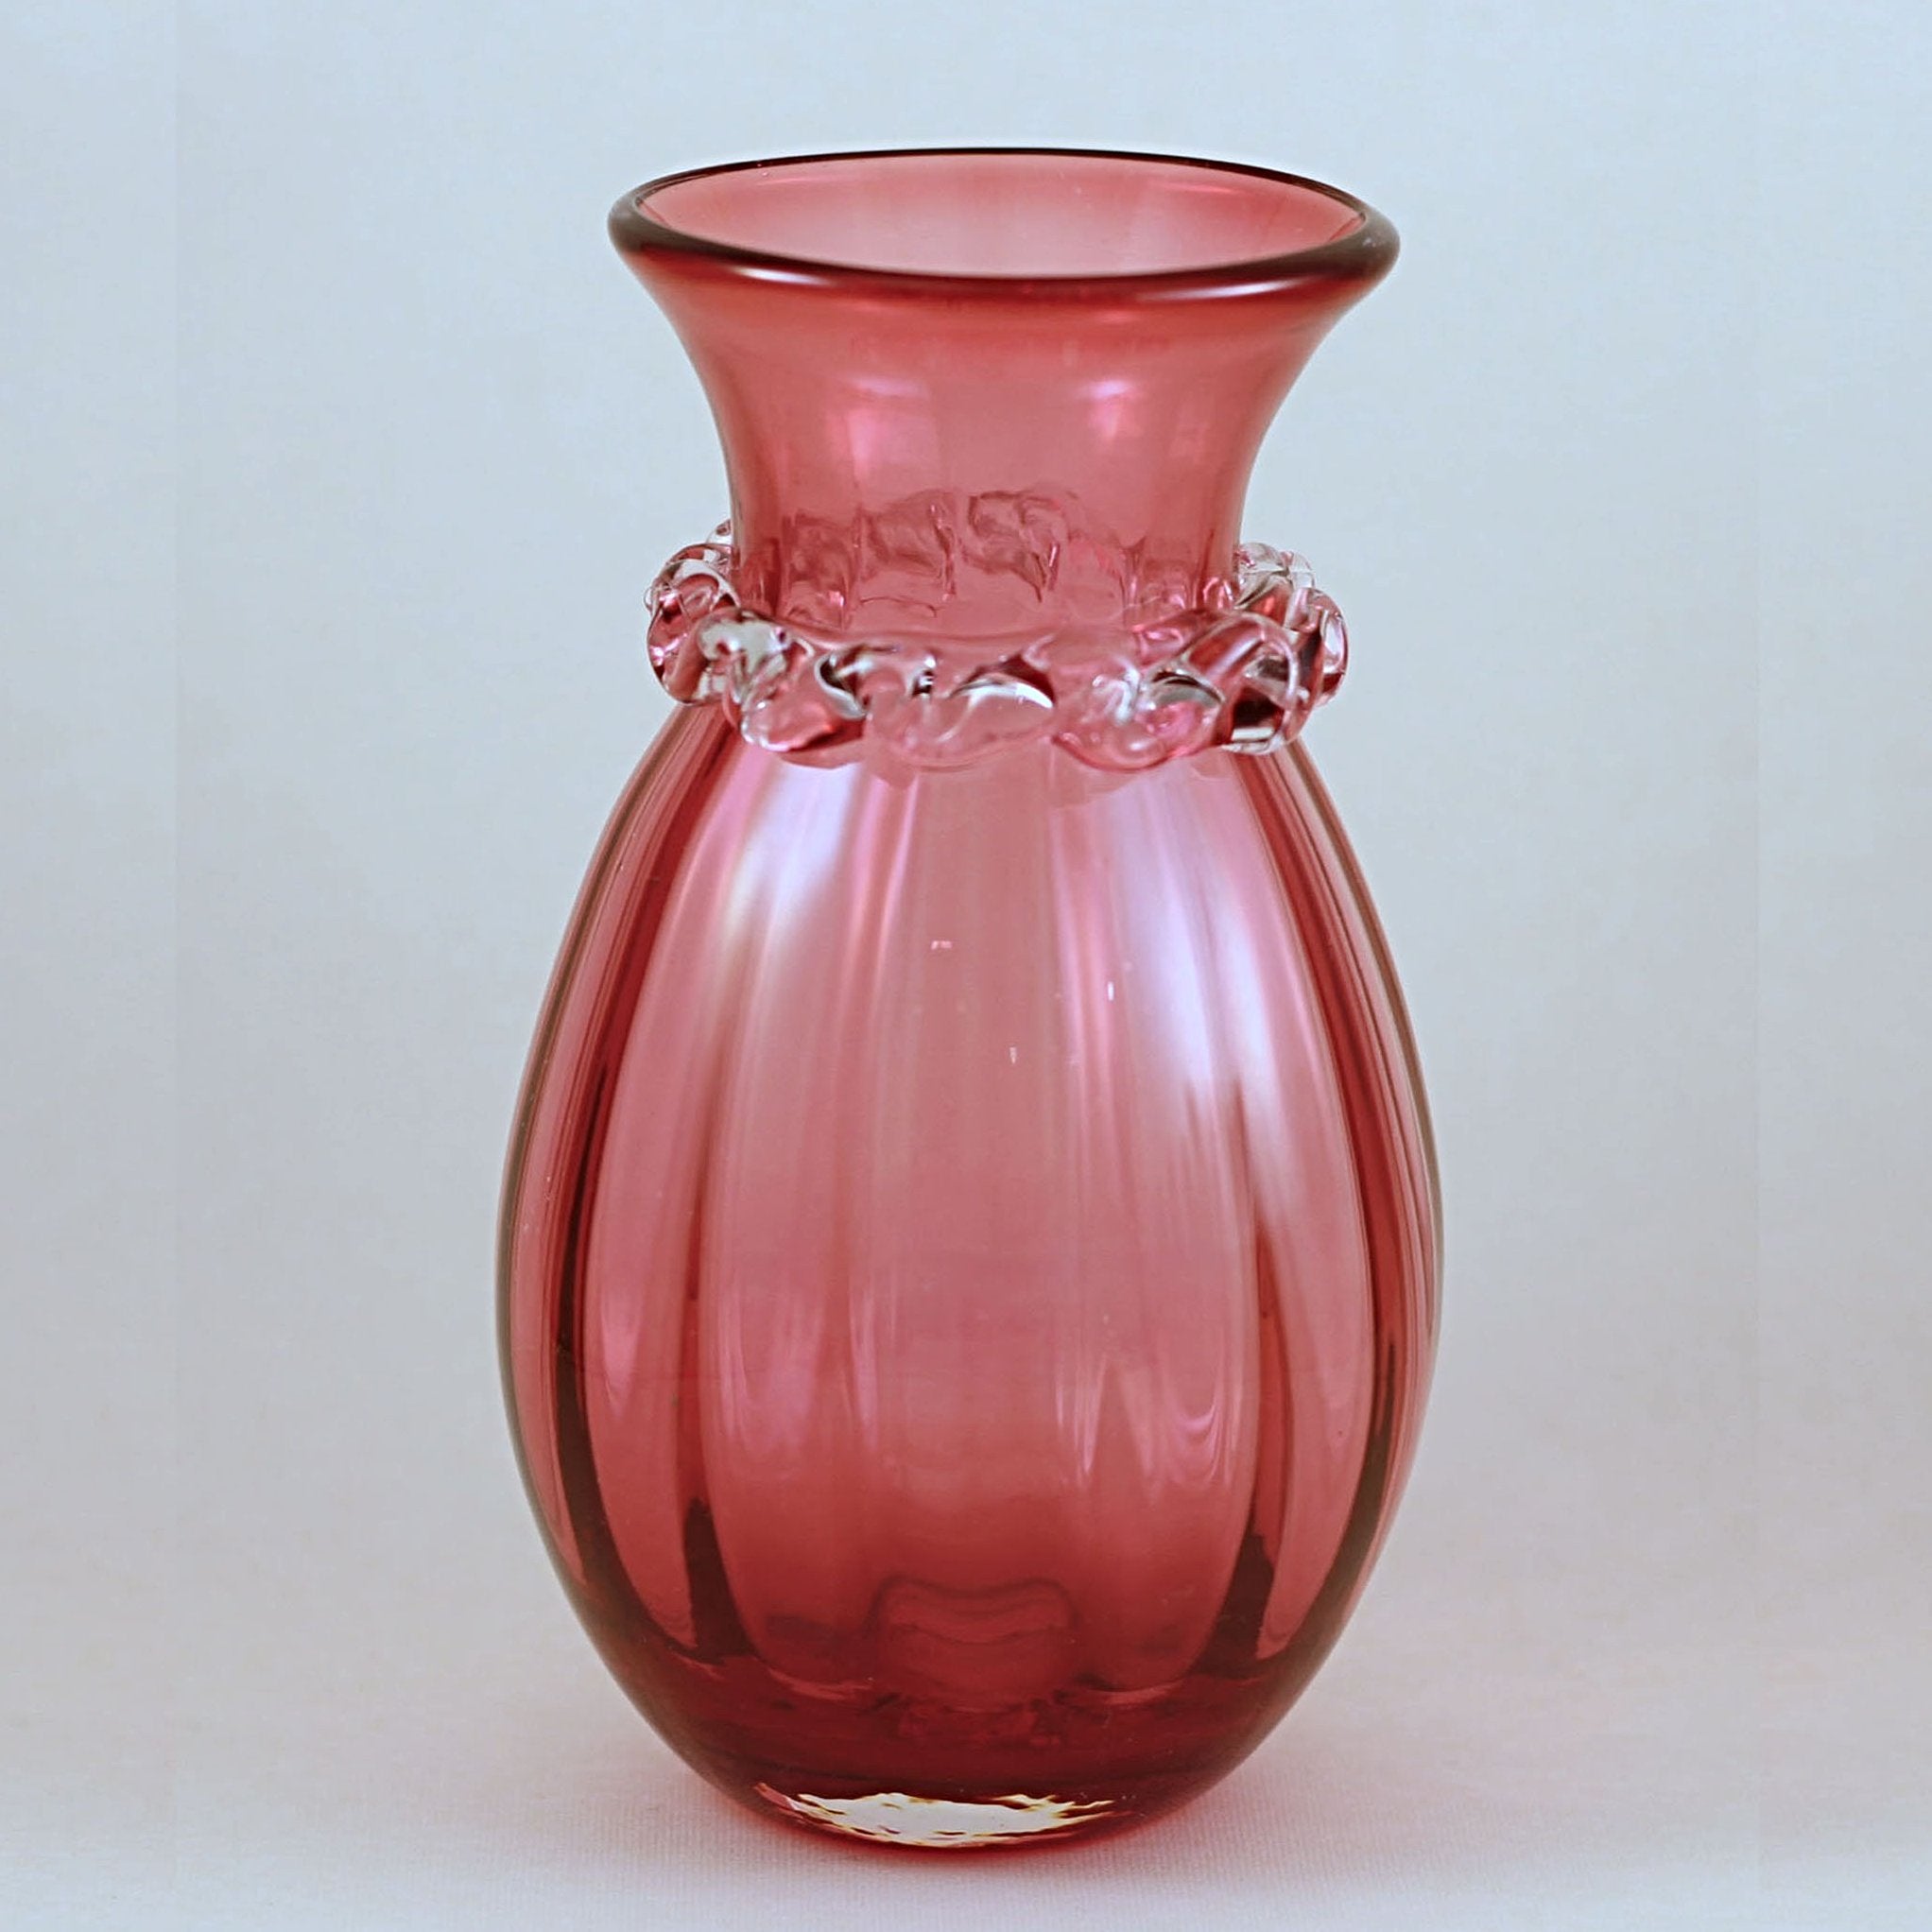 PILGRIM CRANBERRY GLASS Vase with Fancy Rigaree Collar and Optic Stripe  Circa 1980s